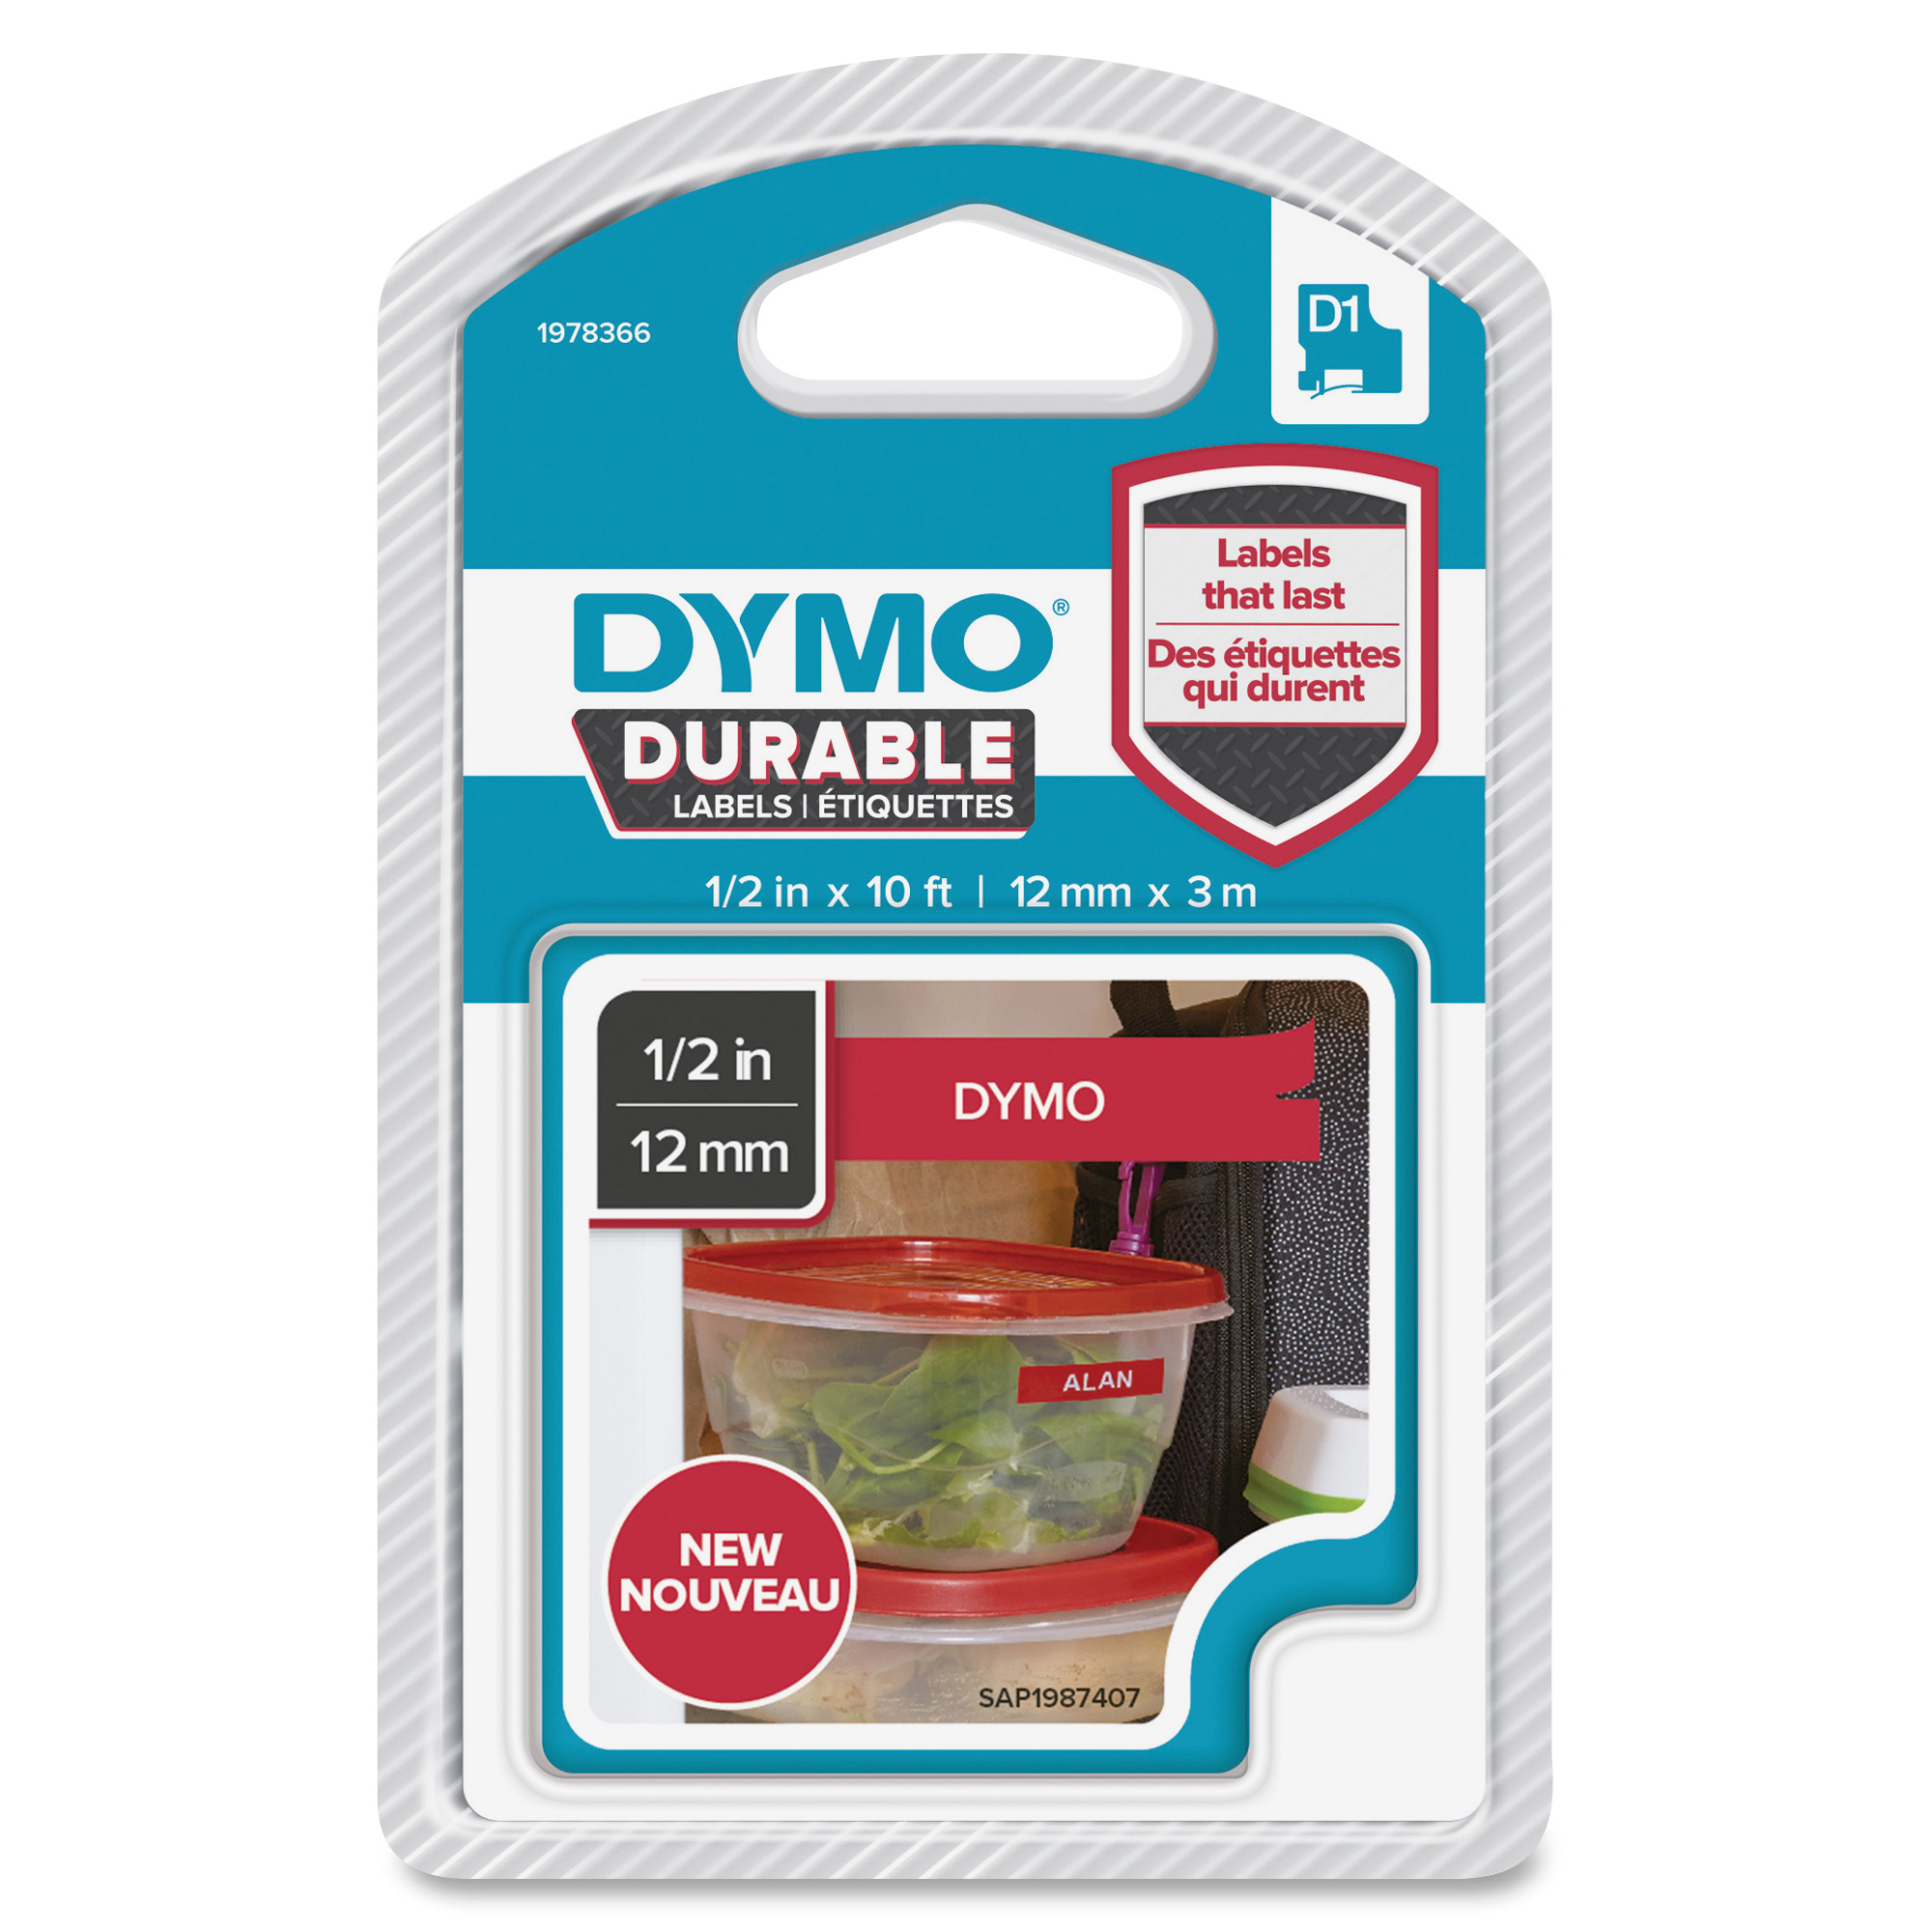 Original Dymo 1978366 White On Red 12mm x 3m D1 Durable Label Tape (1978366)